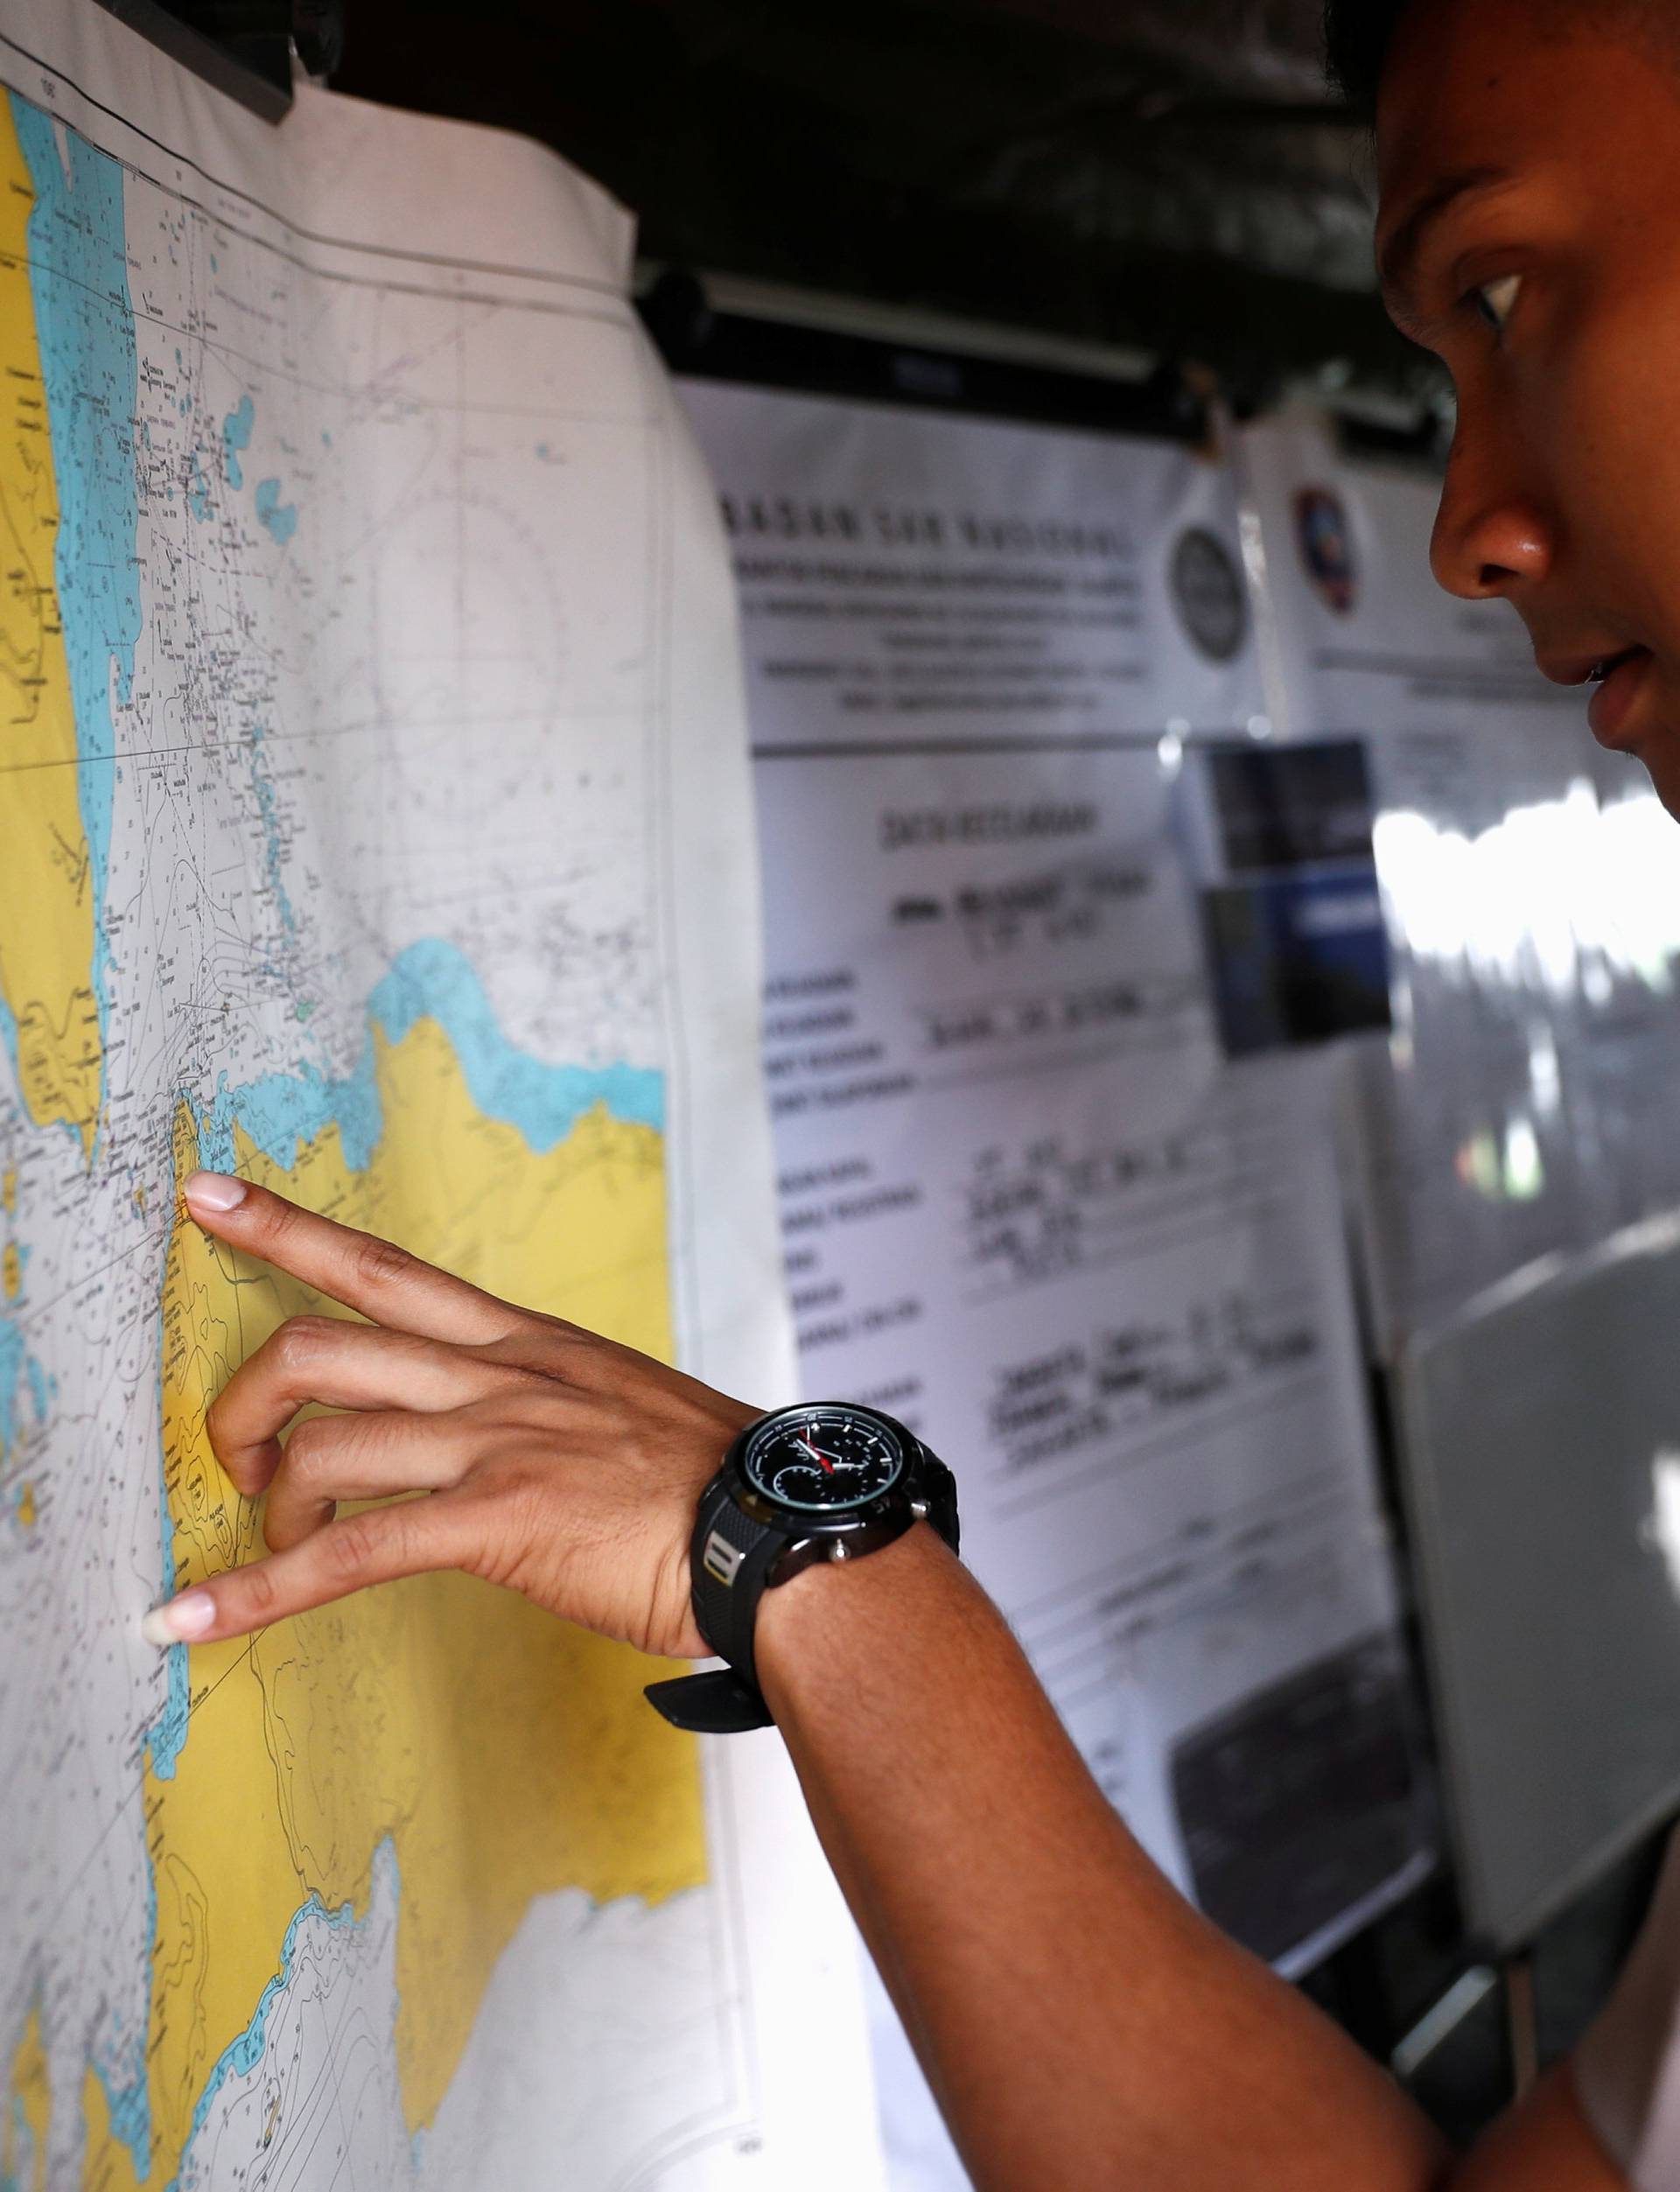 An Indonesian police officer studies a map in the search and rescue command center for the Lion Air flight JT610 crash, at Tanjung Priok port in Jakarta